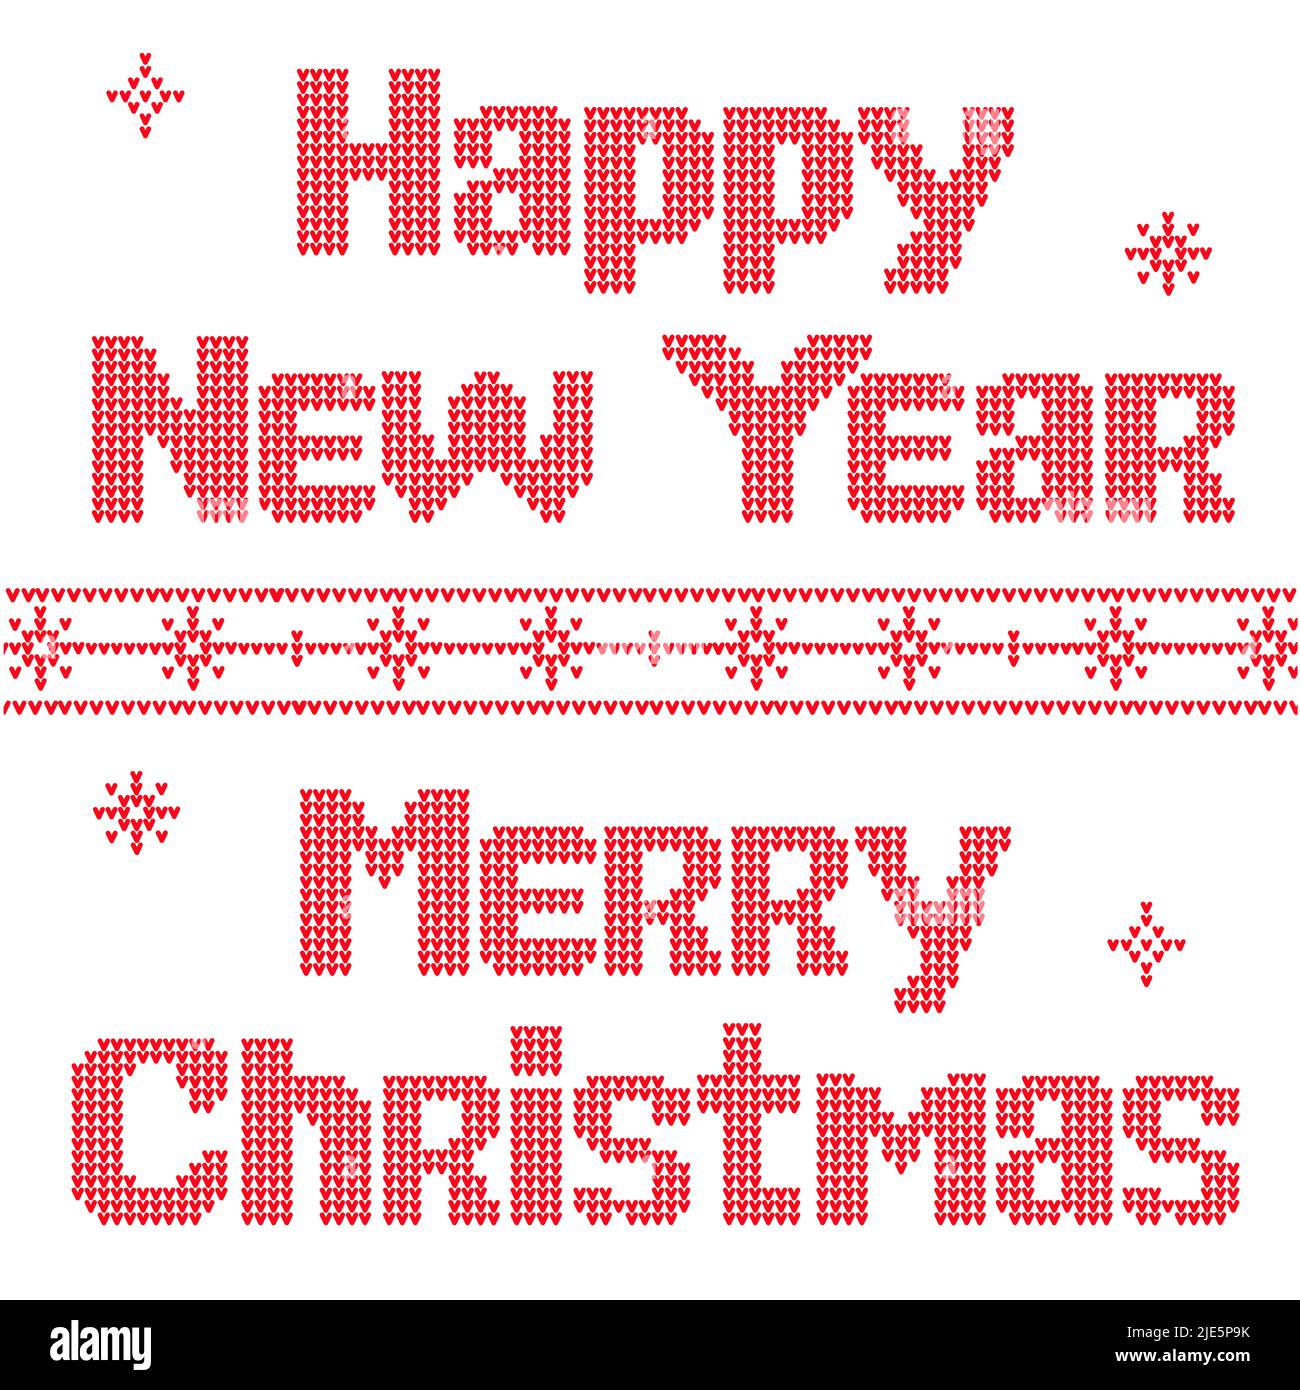 Vector illustration Happy New Year, Merry Christmas pattern for knitted Ugly Sweater, scheme for embroidery: red letters on a white background. Templa Stock Photo